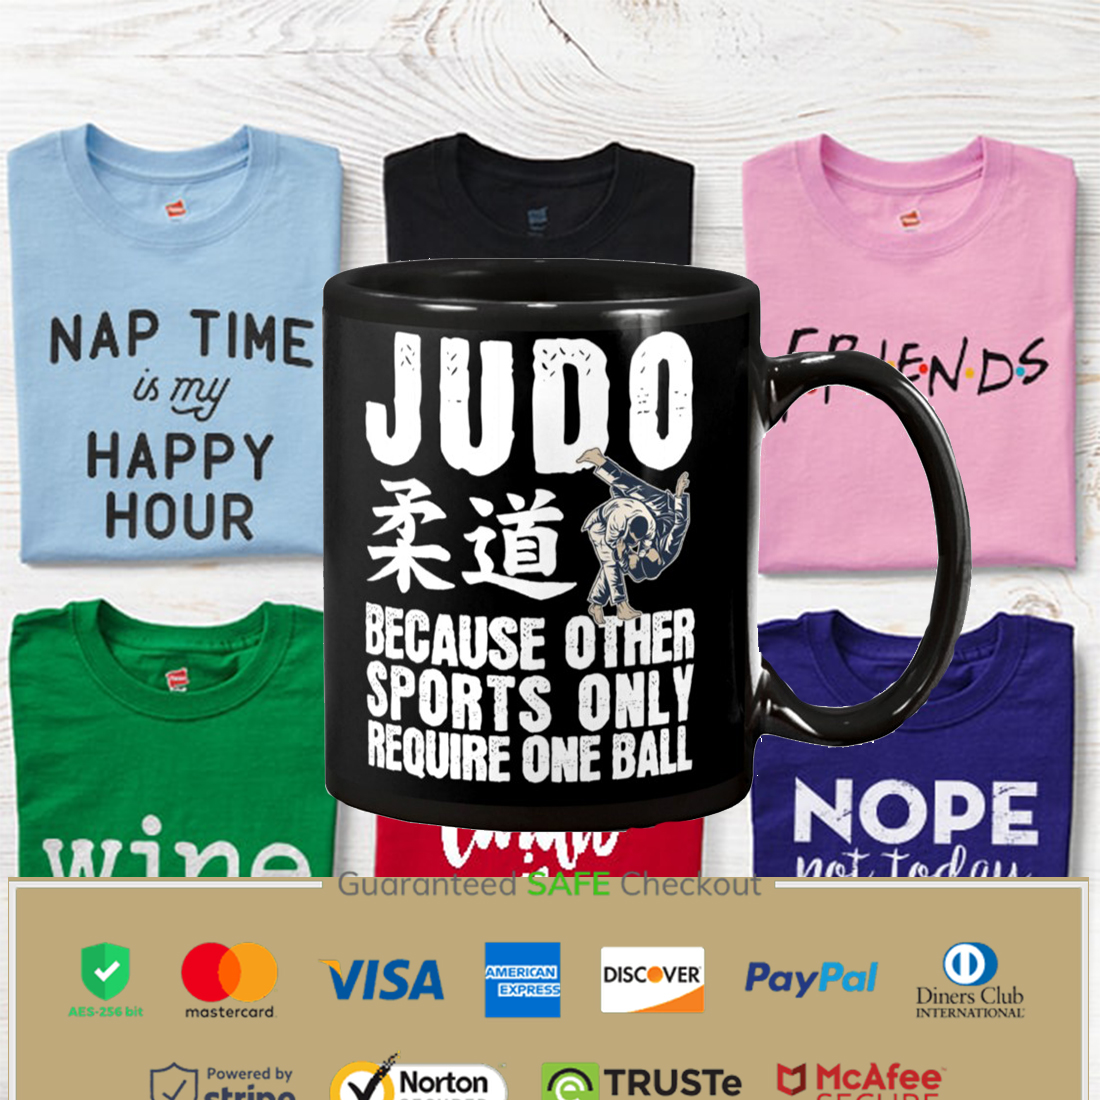 Judo Because Other Sports Only Require One Ball Mug Apparel